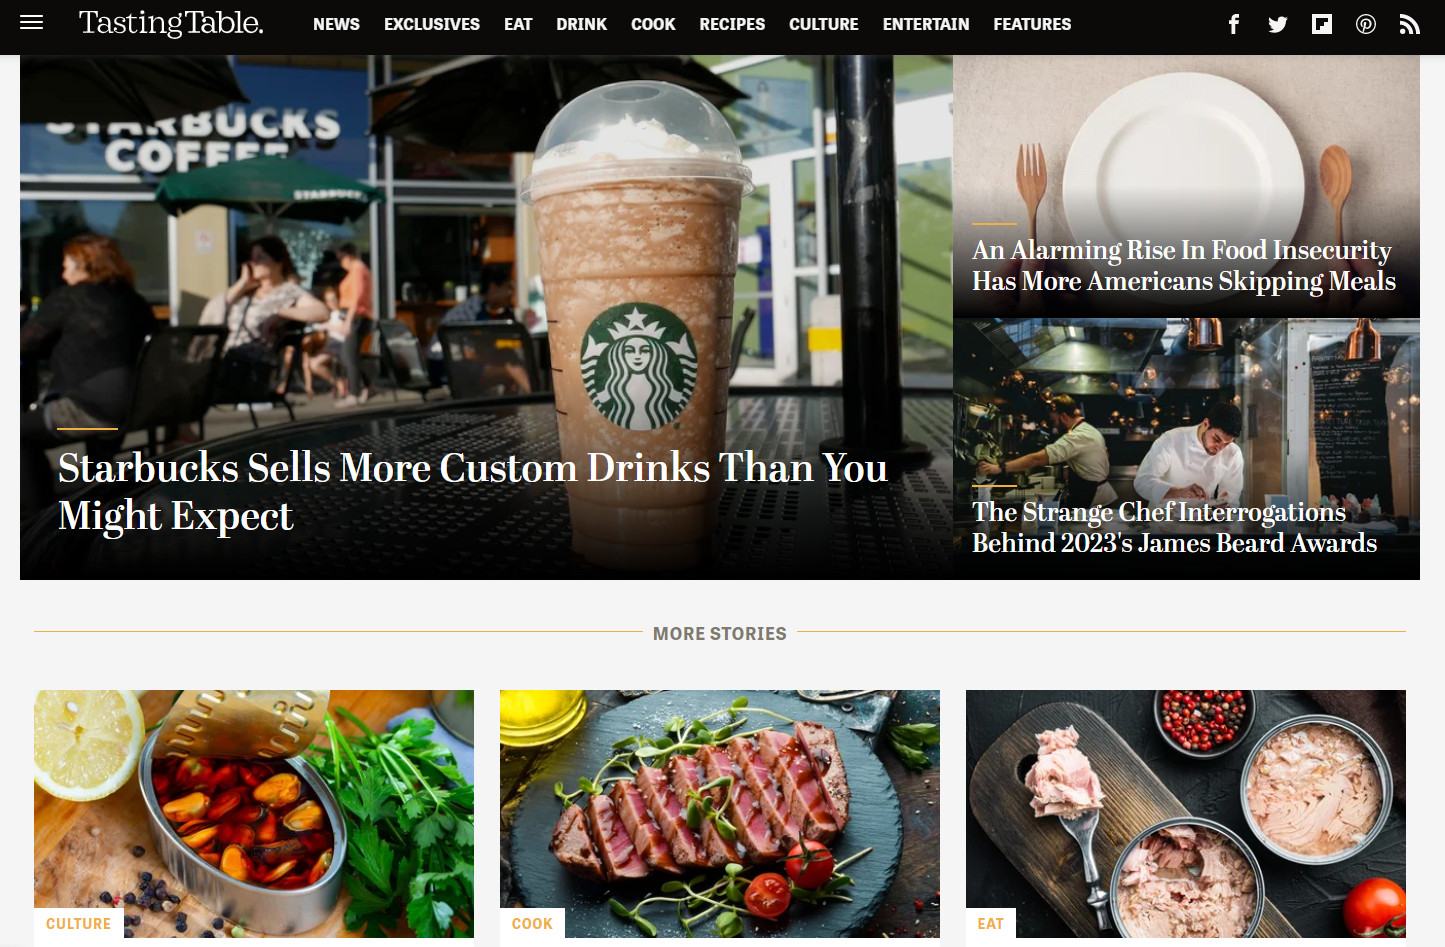 The Tasting Table is by far one of the best foodie websites for the hottest news, stories and recipes 